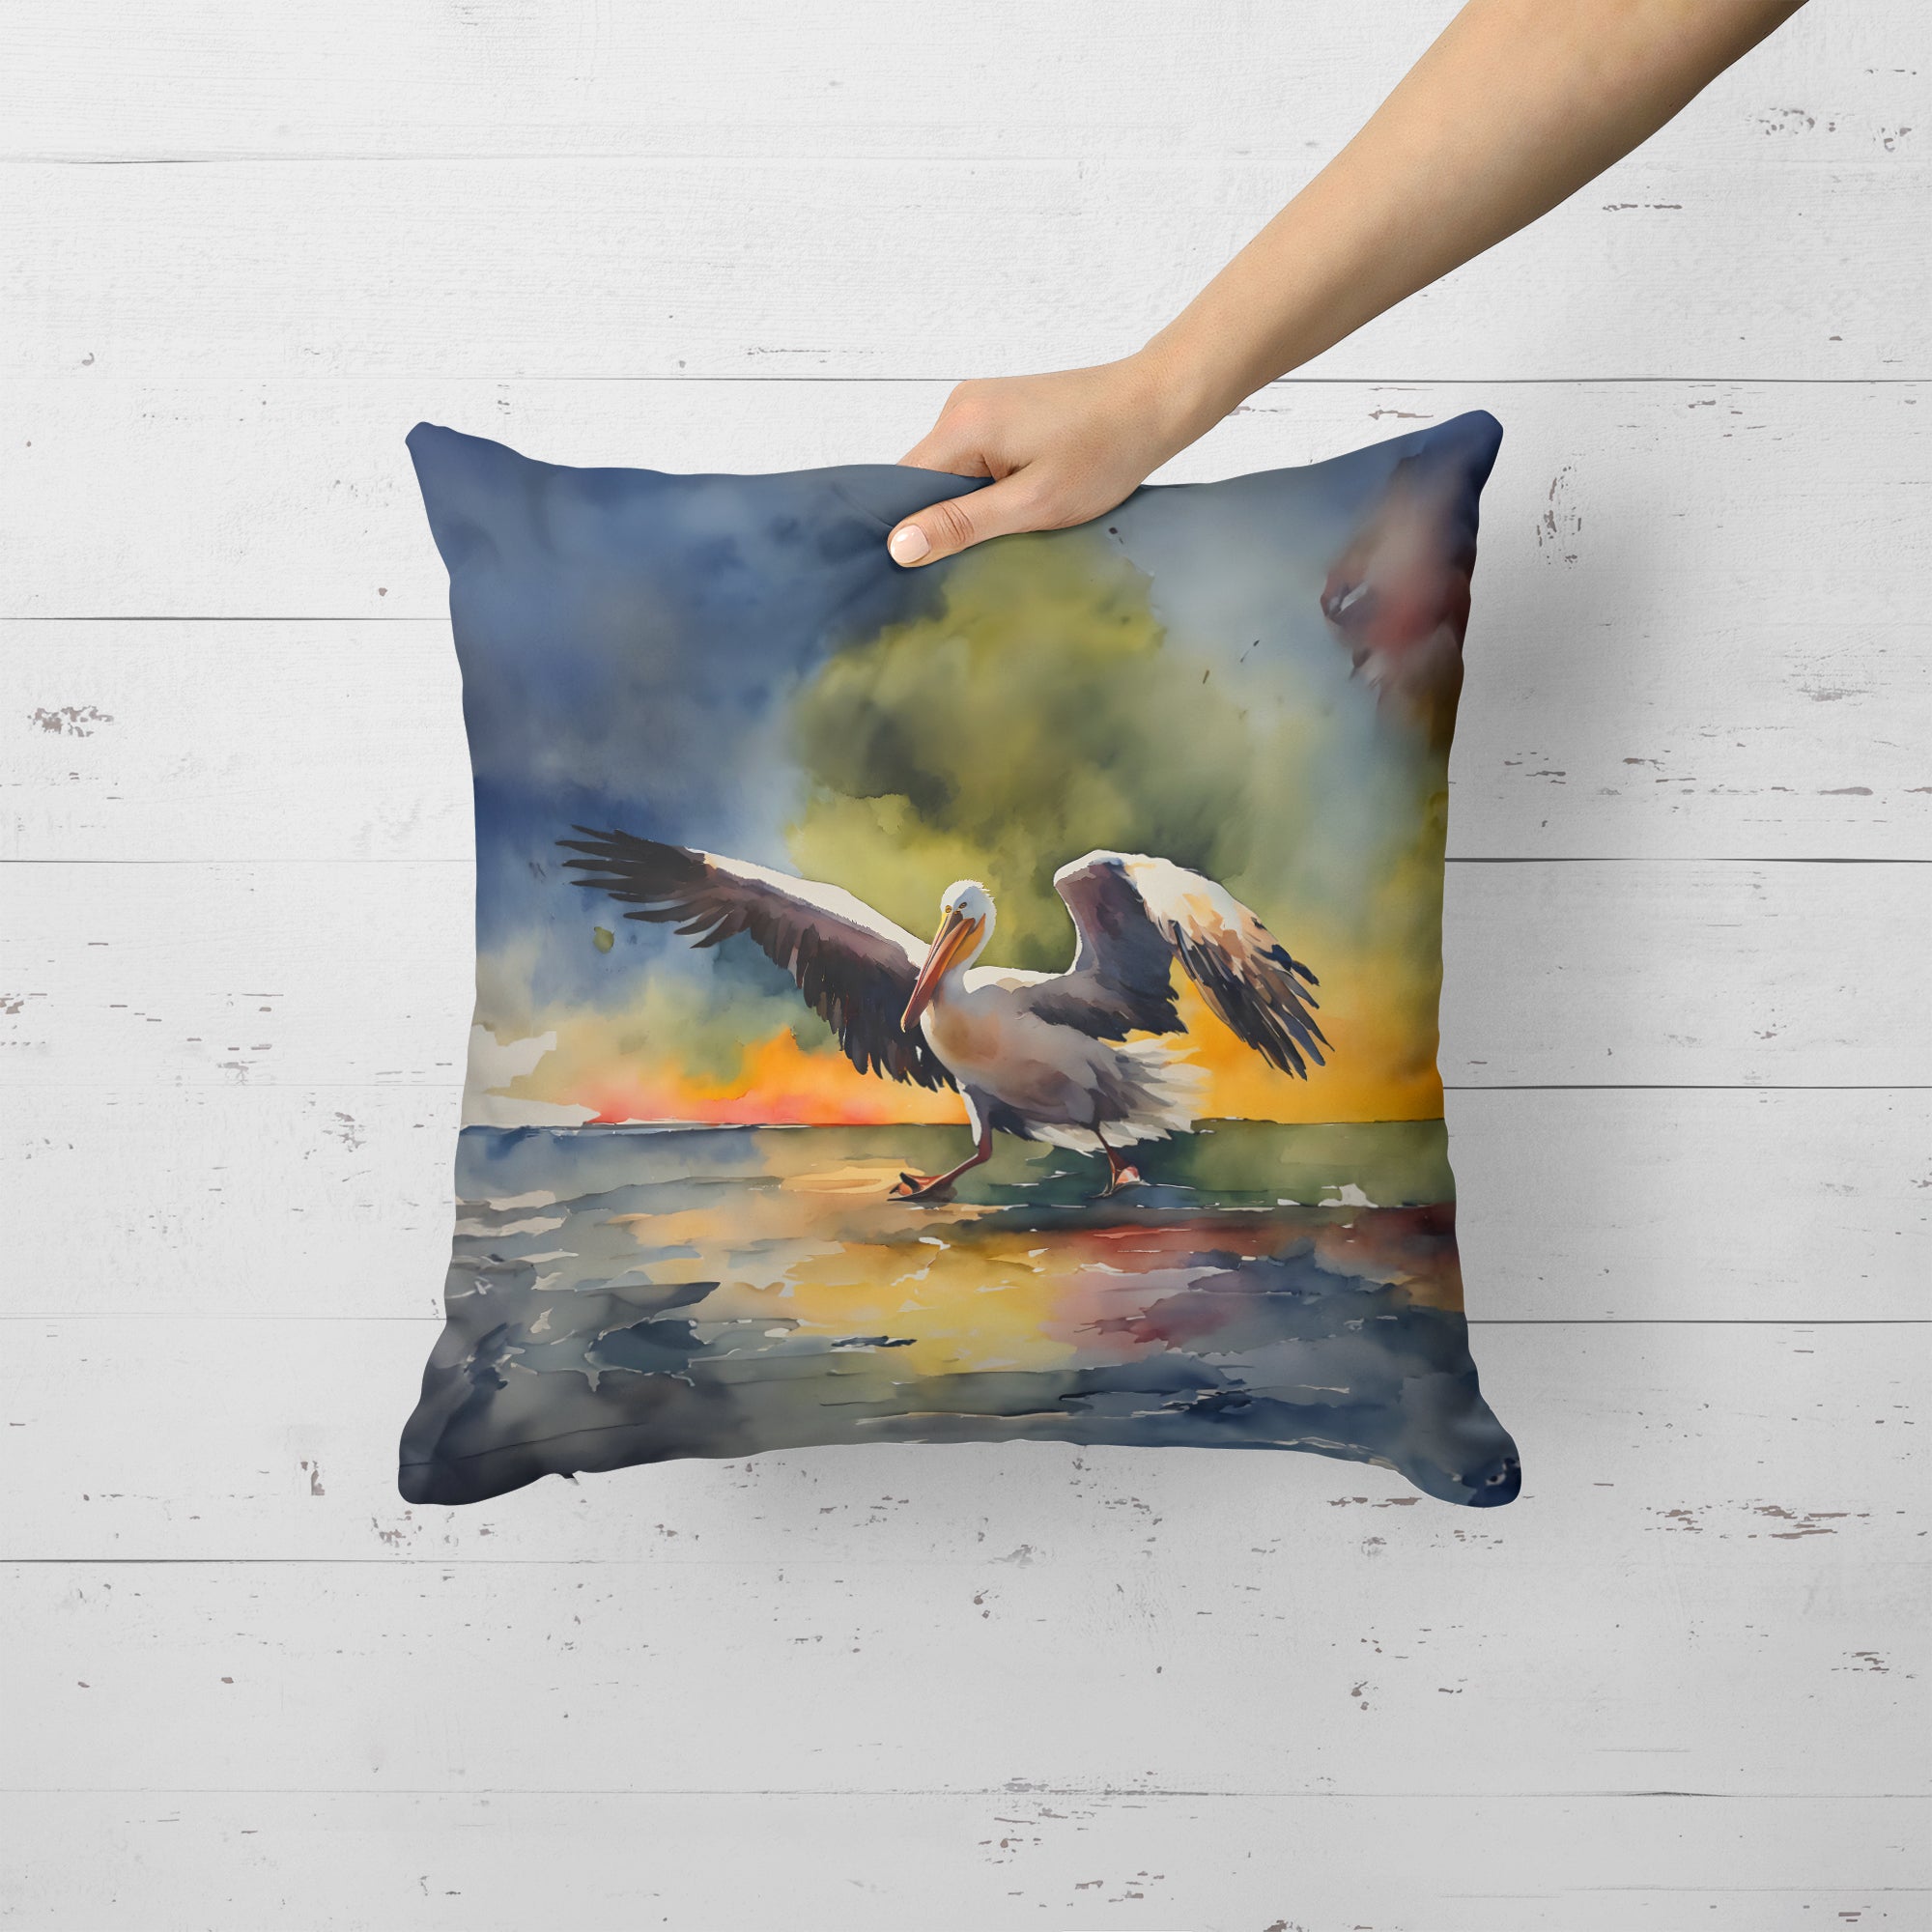 Buy this Pelican Throw Pillow